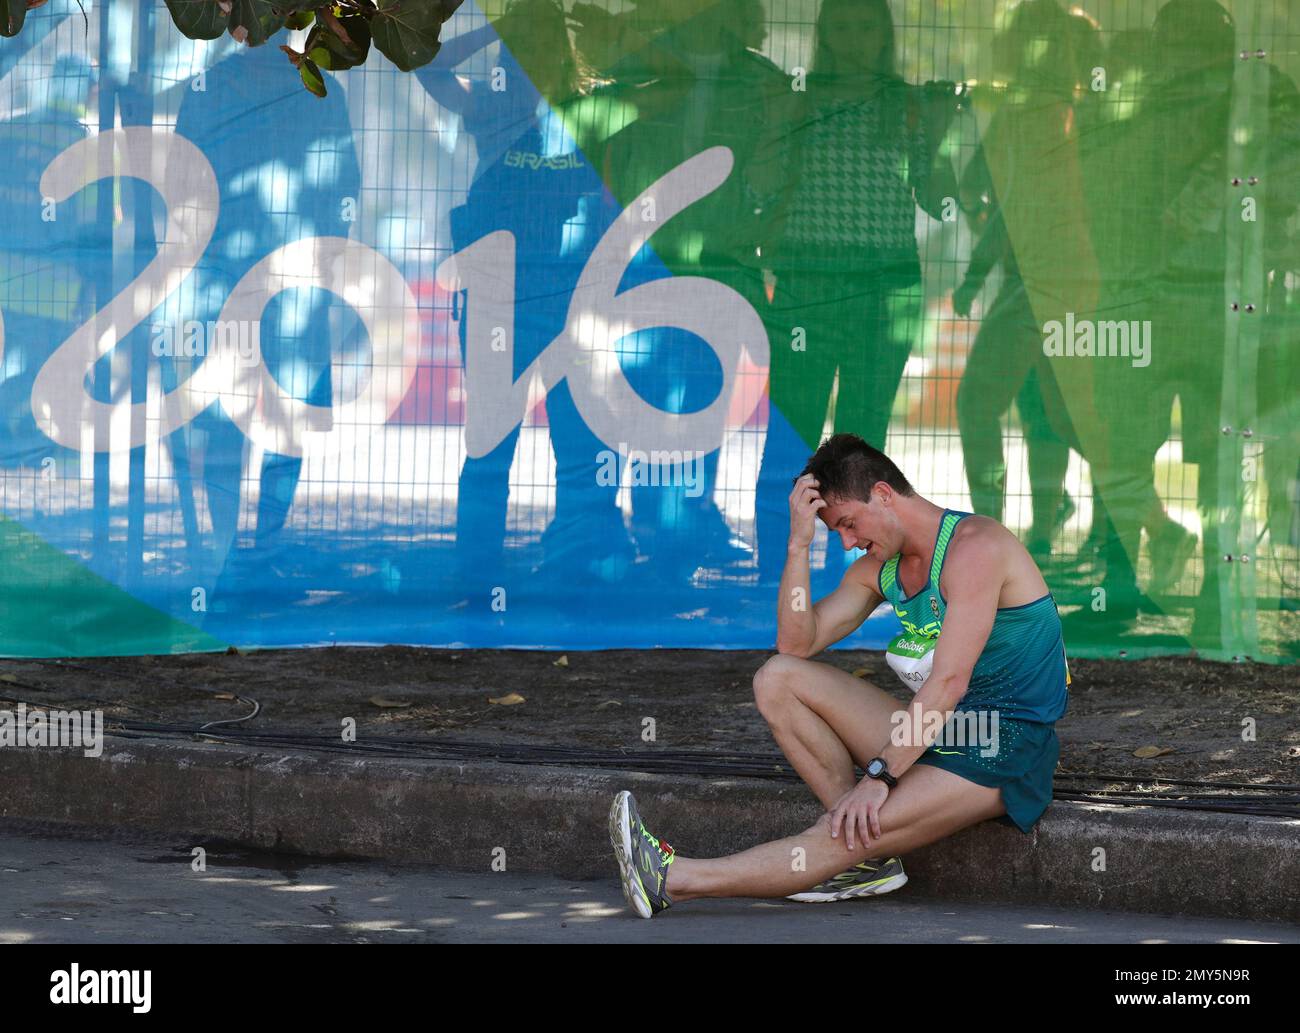 Spectators watch as Jose Alessandro Bagio, of Brazil, sits on the curb during the men's 20km race walk final at the 2016 Summer Olympics in Rio de Janeiro, Brazil, Friday, Aug. 12, 2016. Bagio did not finish the race. (AP Photo/Jae C. Hong) Stock Photo